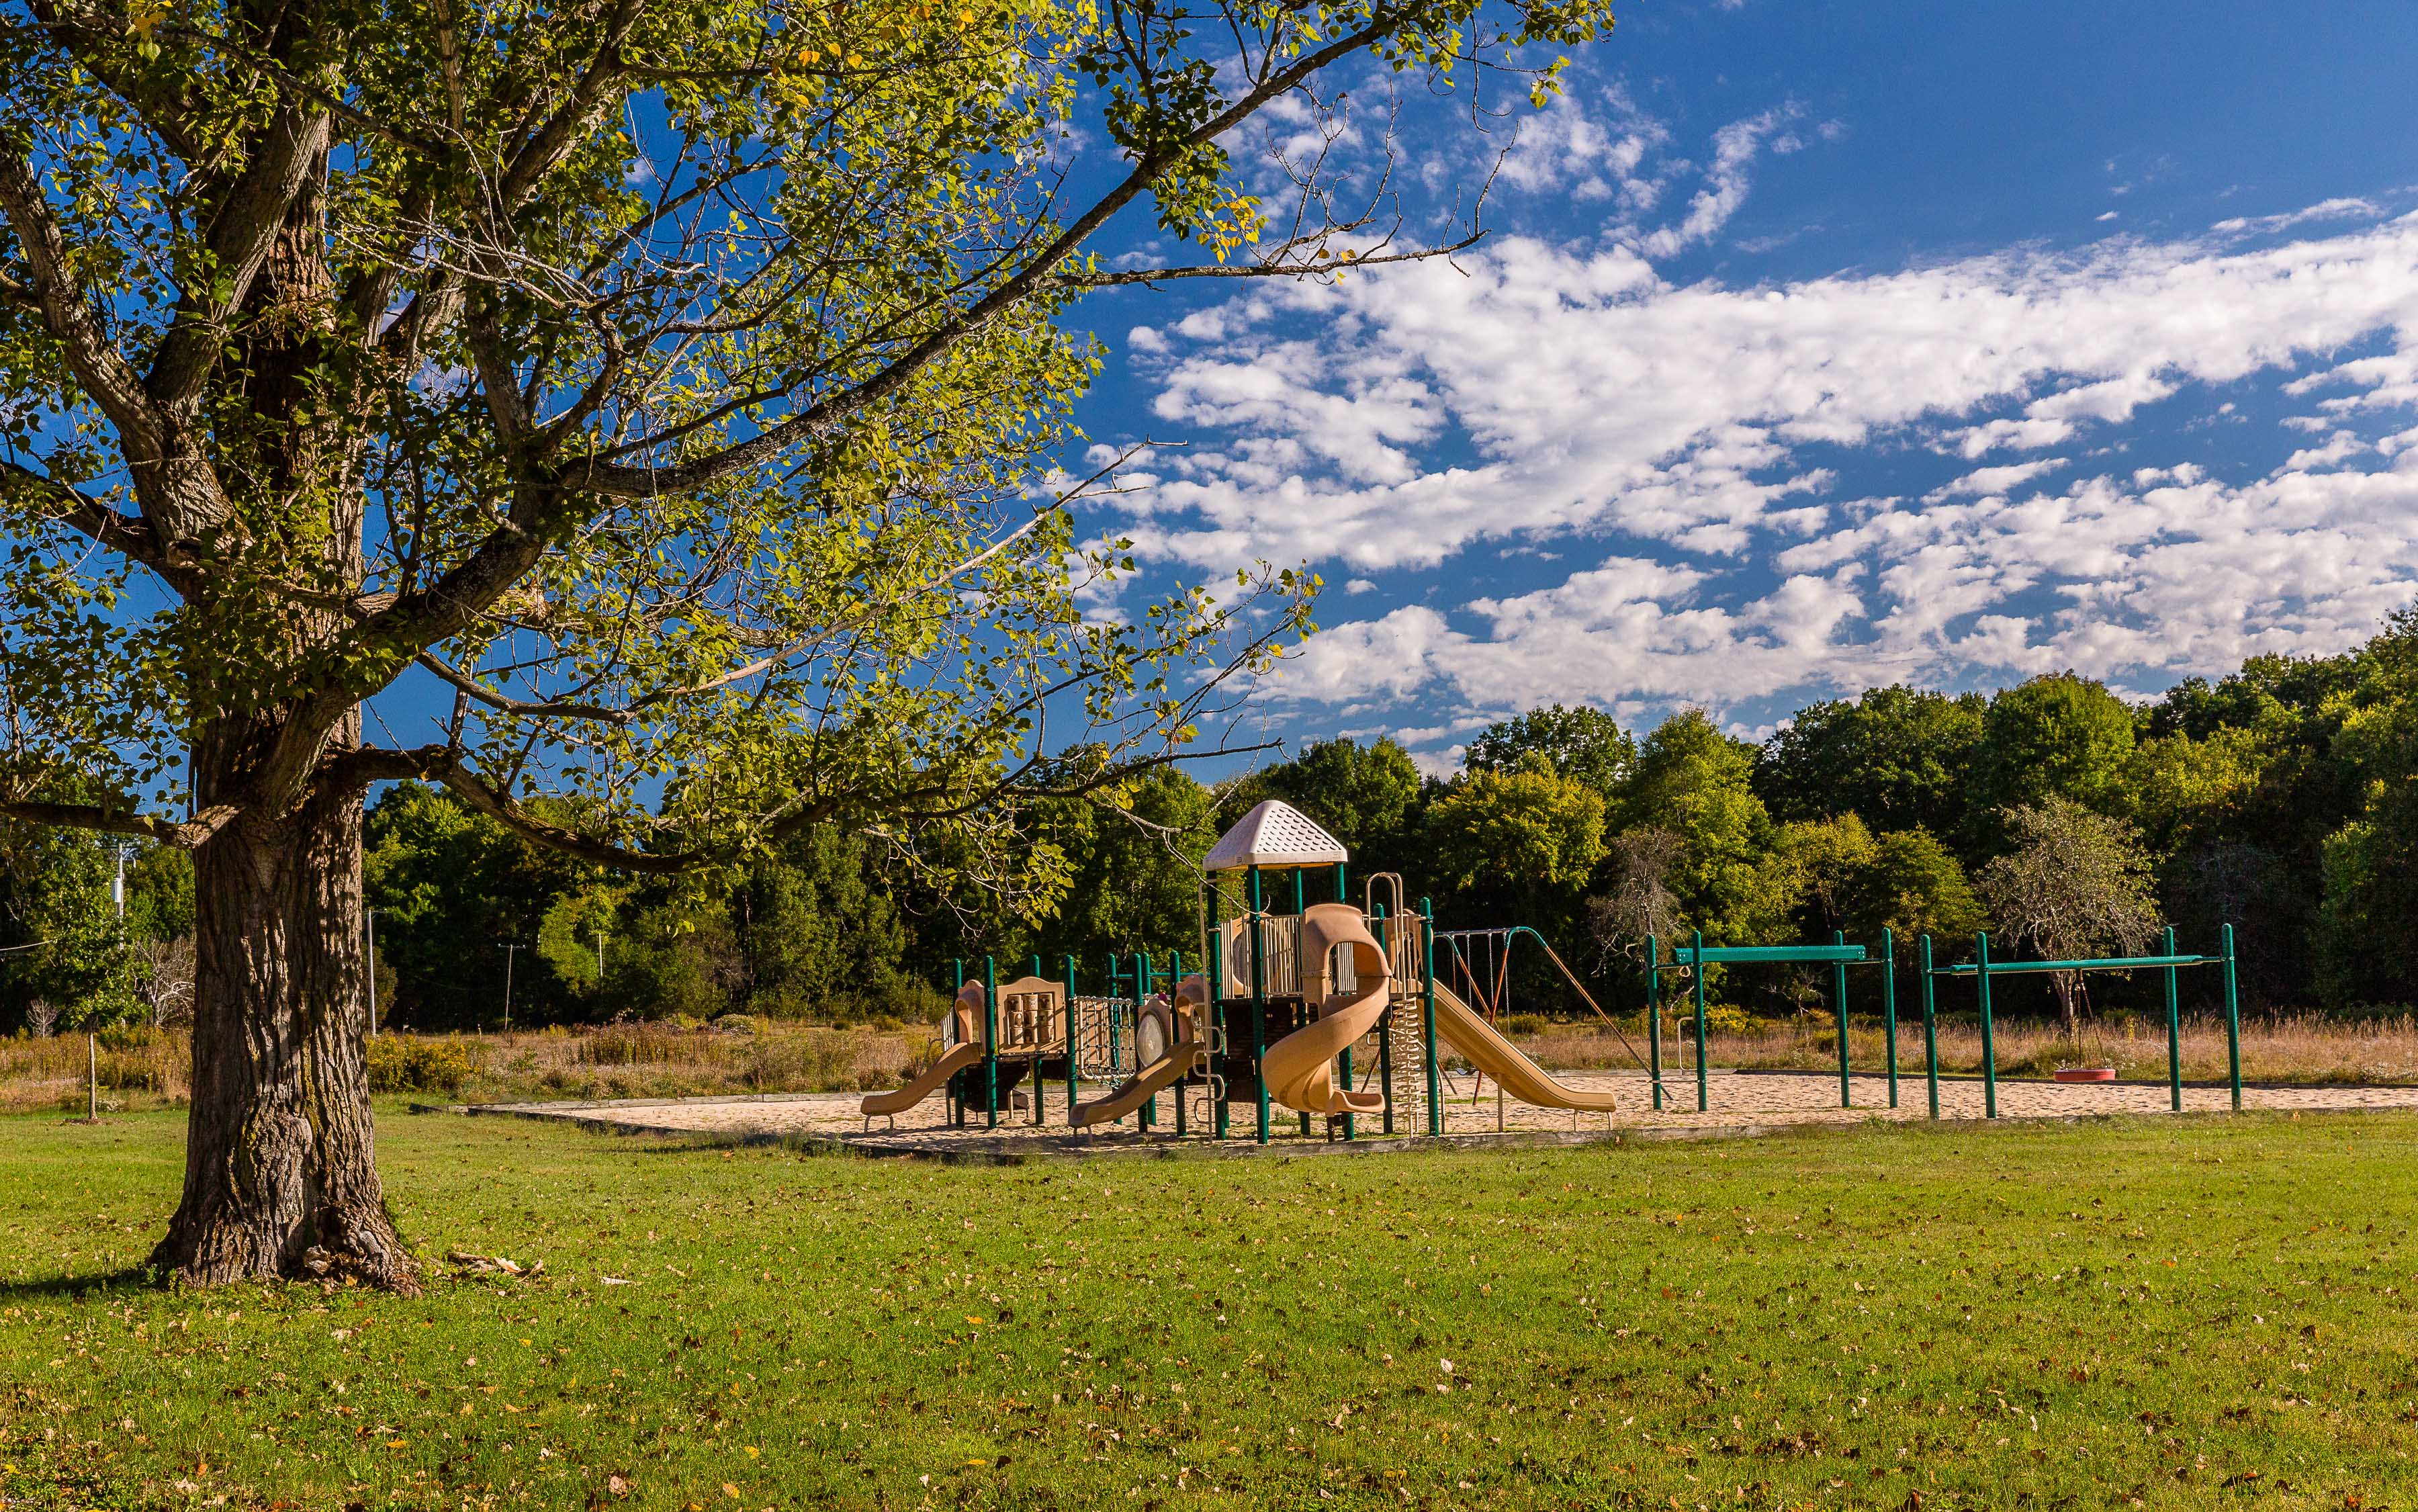 Playground at the Grand River Conservation Campus.